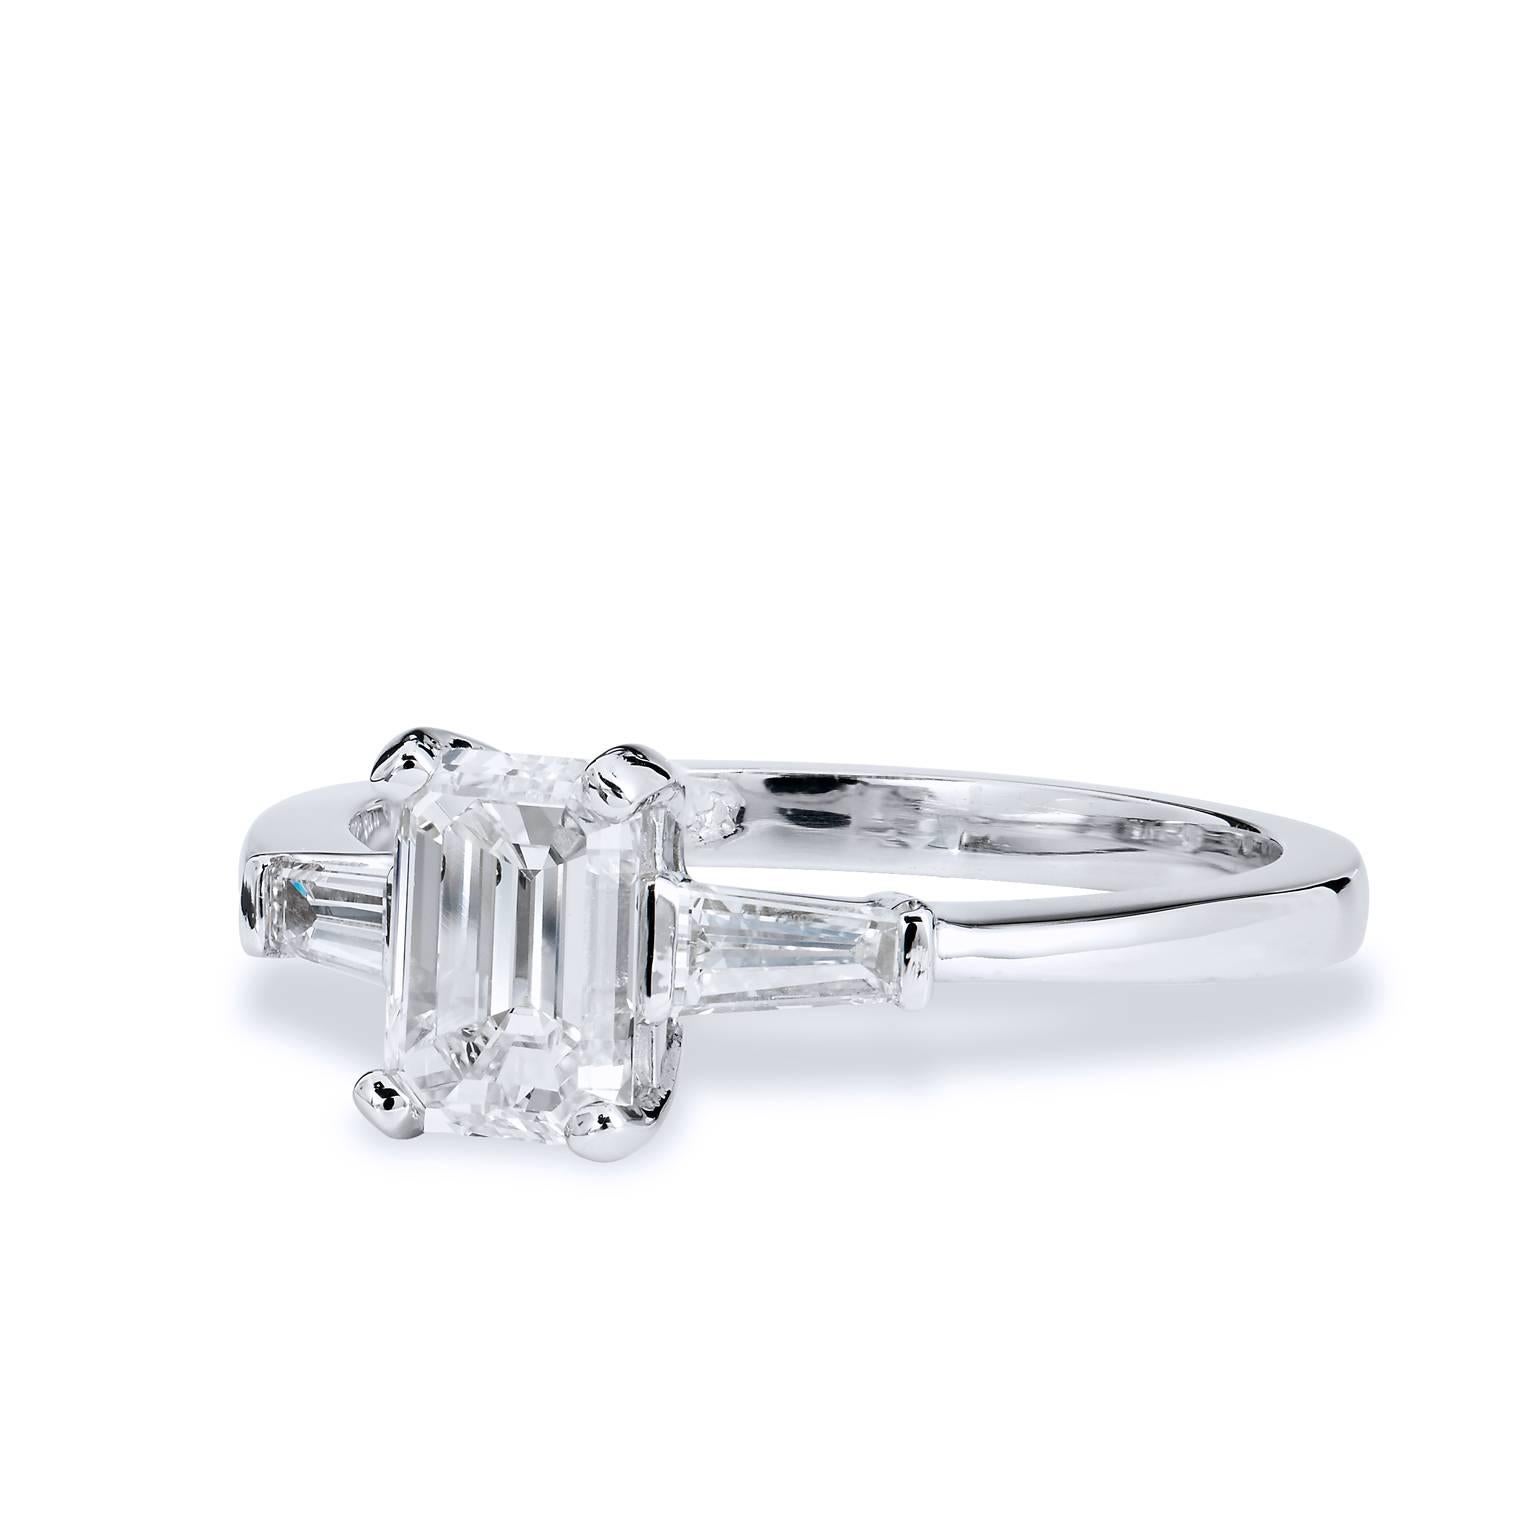 Handmade by H, this platinum engagement ring features a 1.13 carat emerald cut diamond set at center (GIA#2151727348). Two baguette diamonds, with a total weight of 0.30 carat (J/K) set at both sides of the shank, further enhance this piece. An